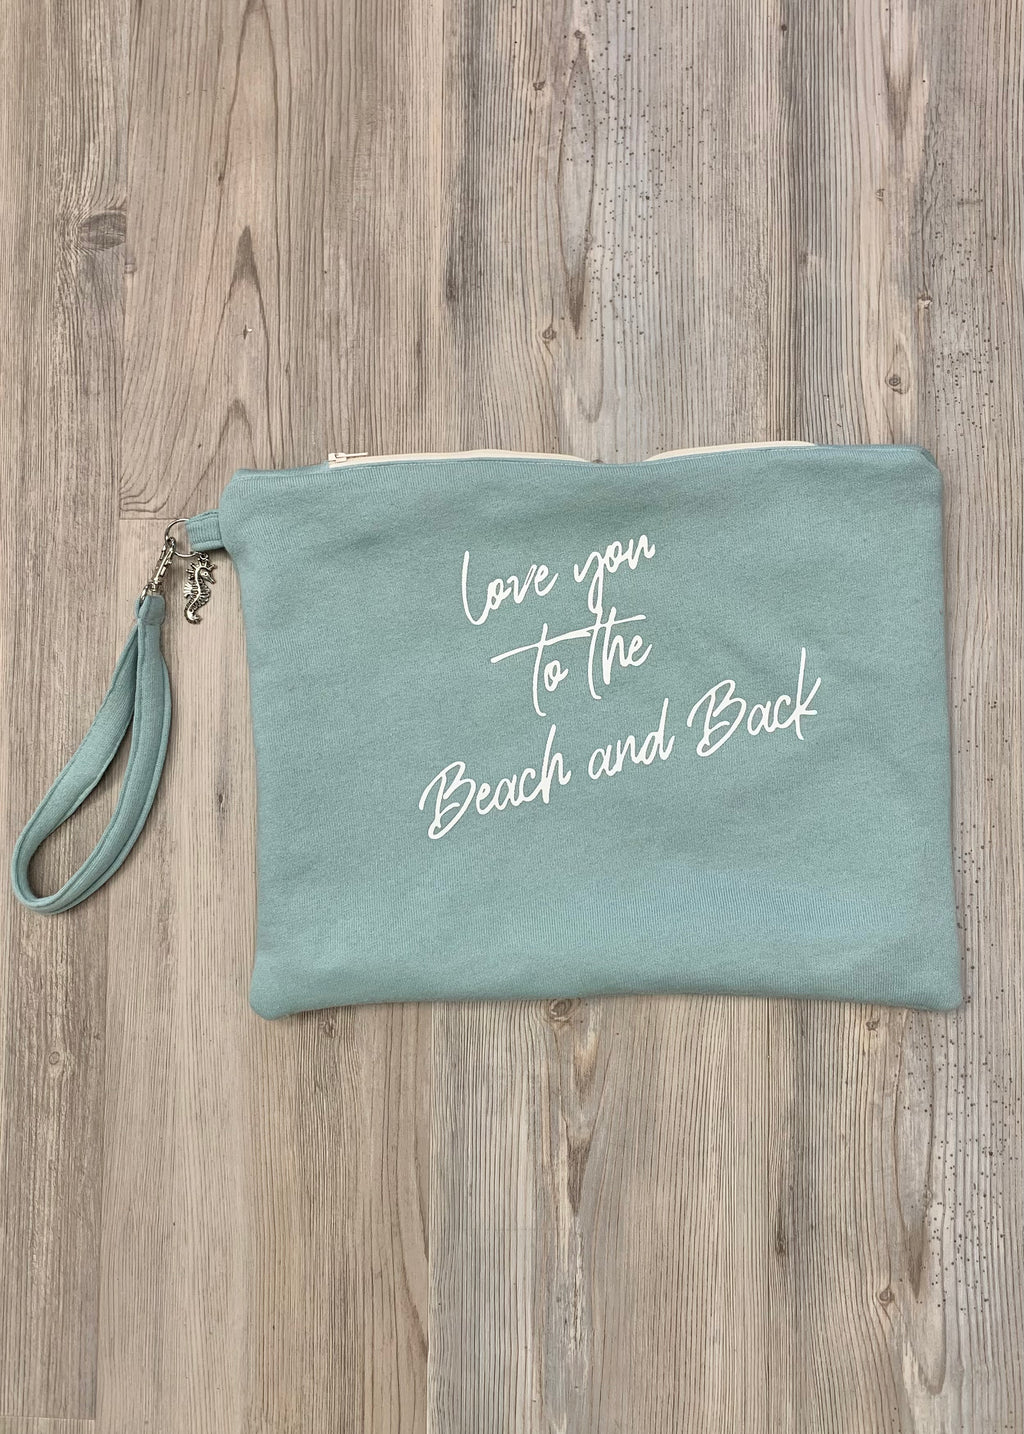 Love You To The Beach and Back Wet Dry Bag